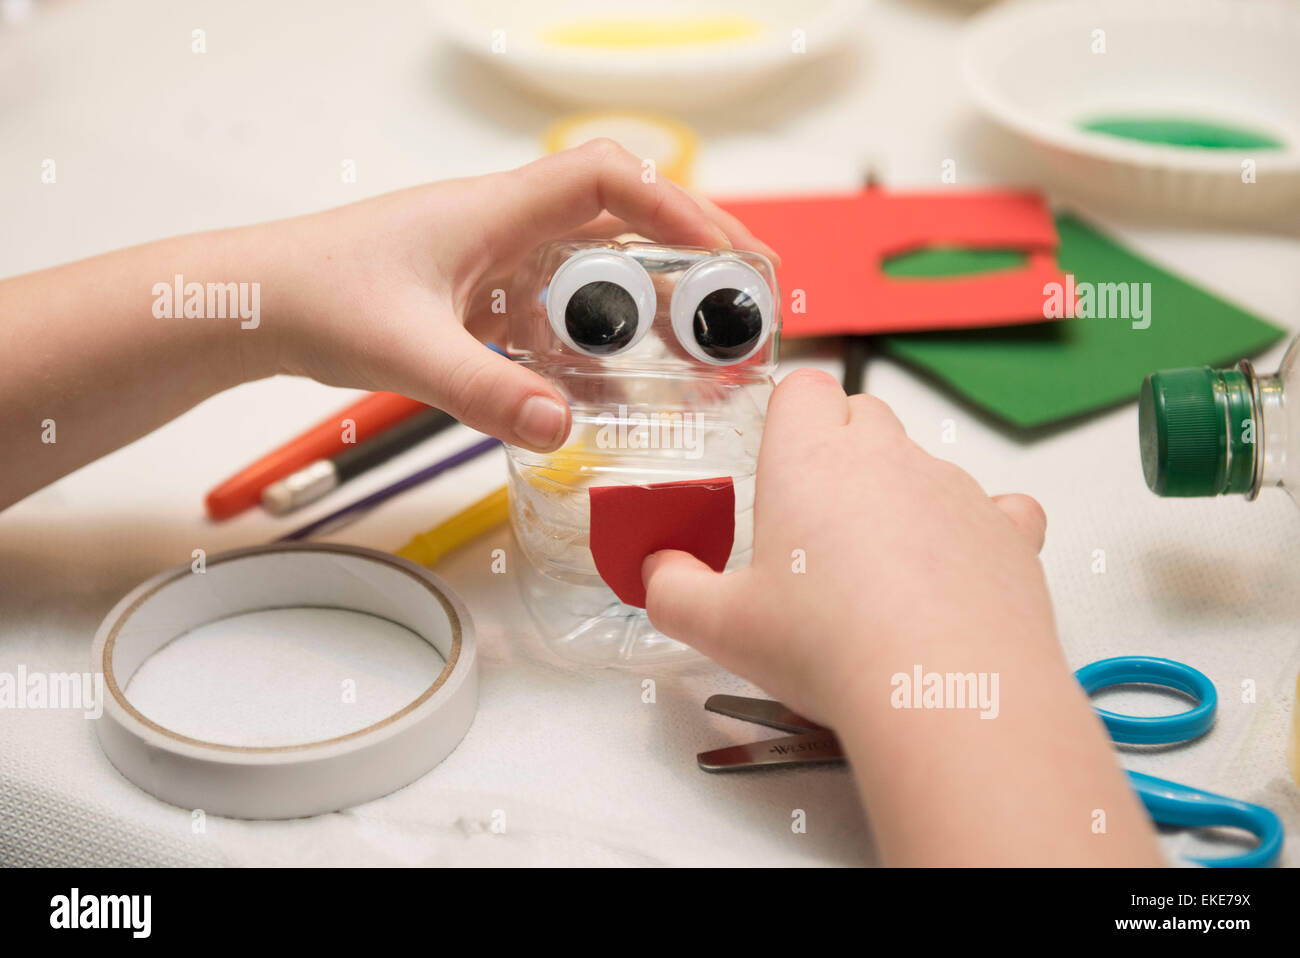 A child makes a toy out of a drinks bottle during an art and craft session. Stock Photo